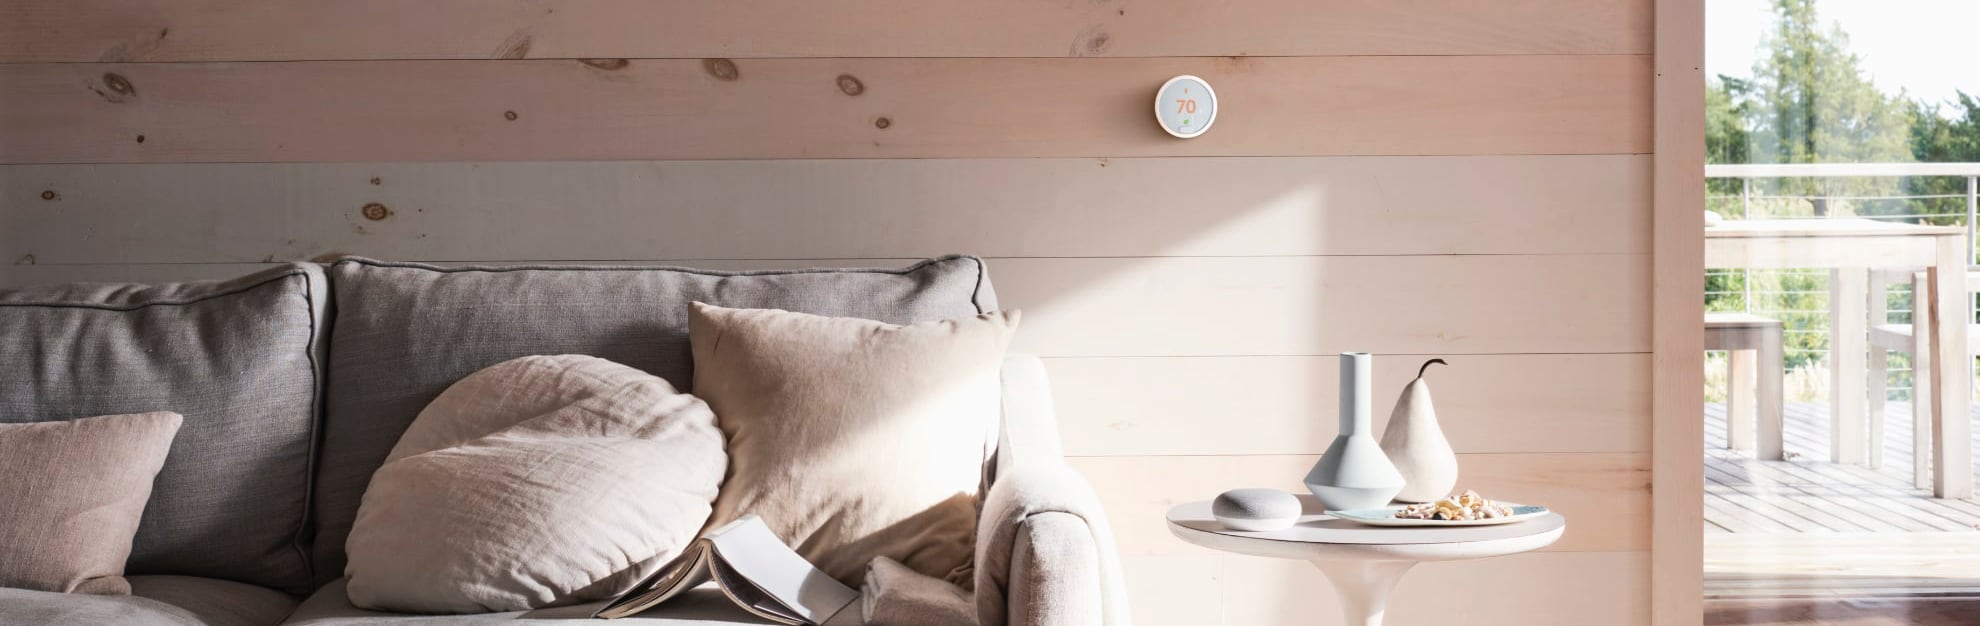 Vivint Home Automation in Fresno